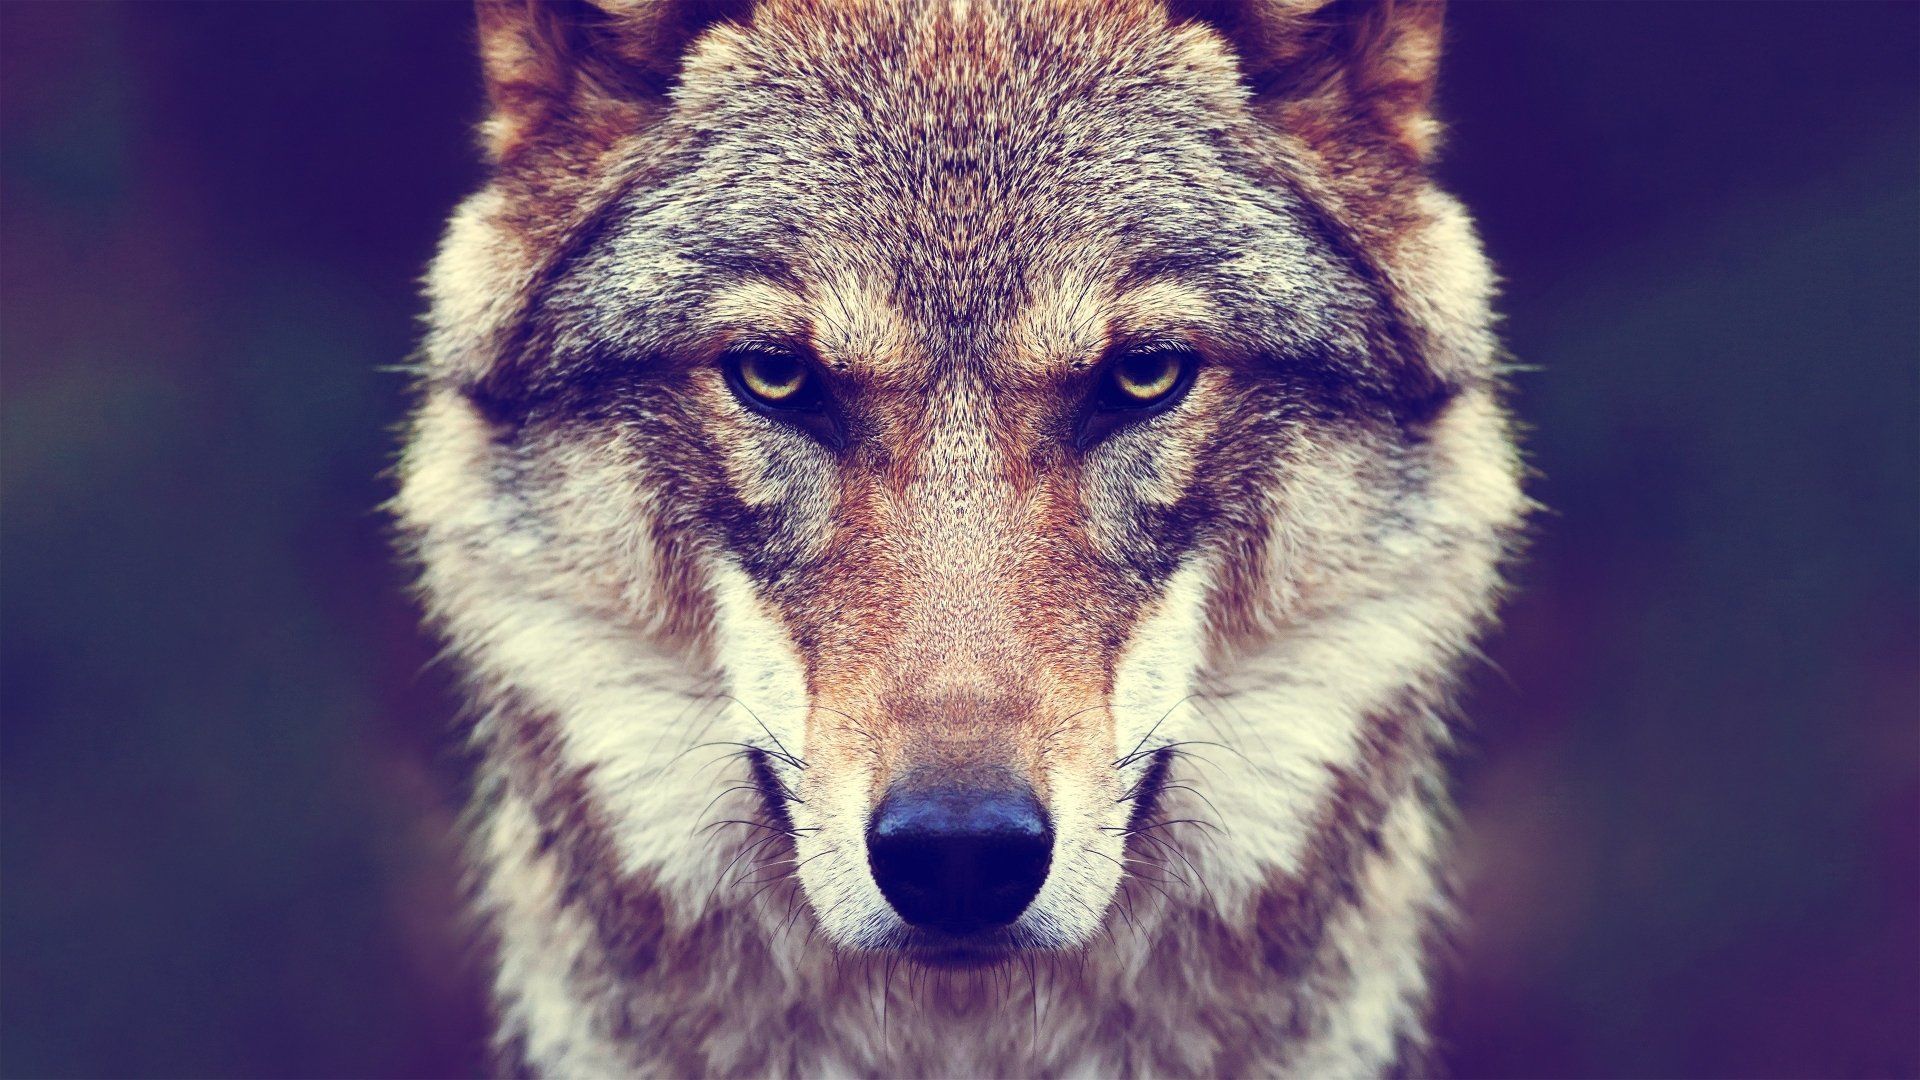 Awesome Alpha Male Wolf HD Wallpaper For iPhone wallpaper in 2020